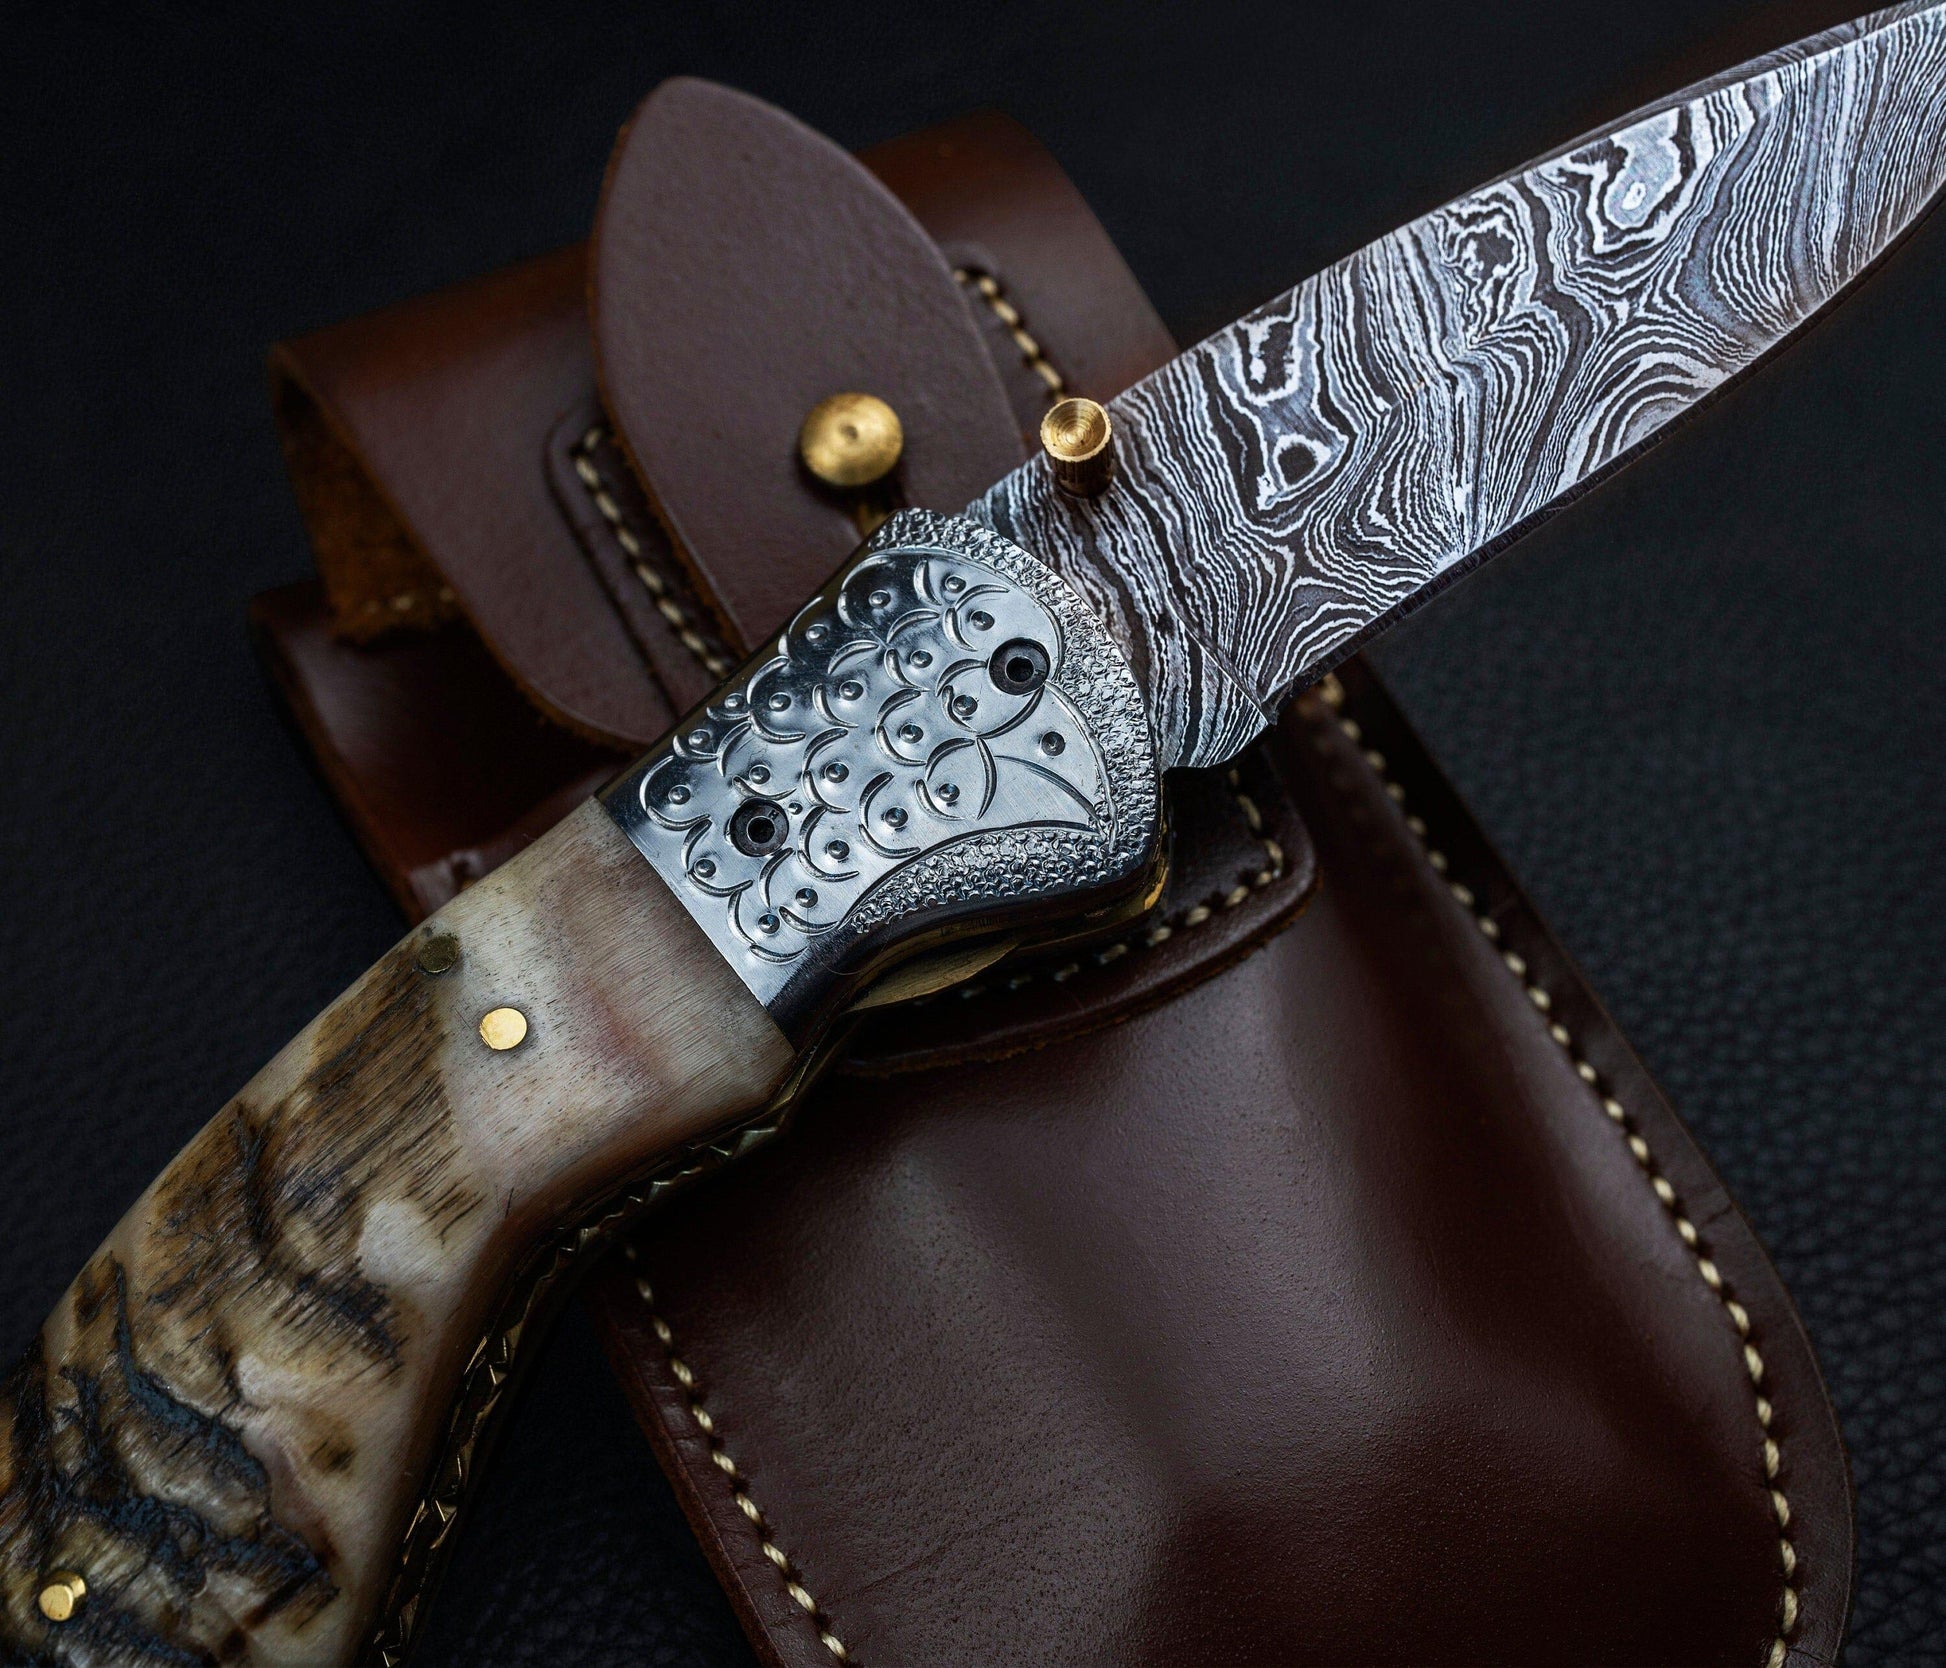 Hand Forged Ram Horn Handle Eagle Damascus Folding Knife, Damascus Pocket Knife, Damascus Steel Hunting knife, Hand Forged Damascus Knife Etsy 